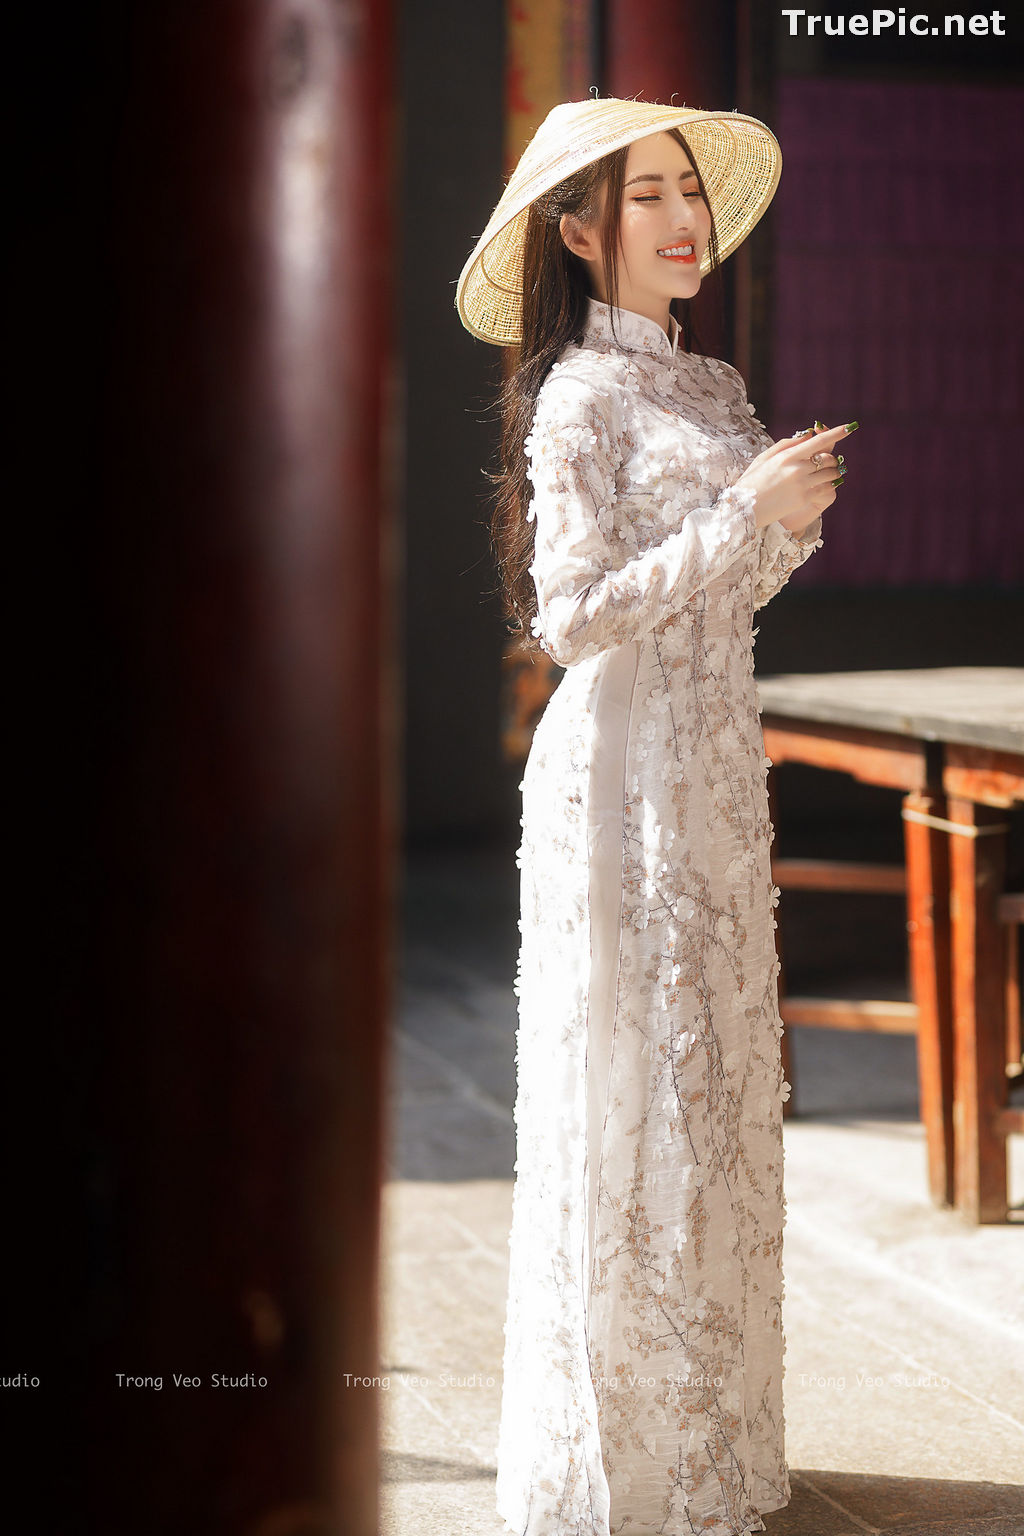 Image The Beauty of Vietnamese Girls with Traditional Dress (Ao Dai) #2 - TruePic.net - Picture-19